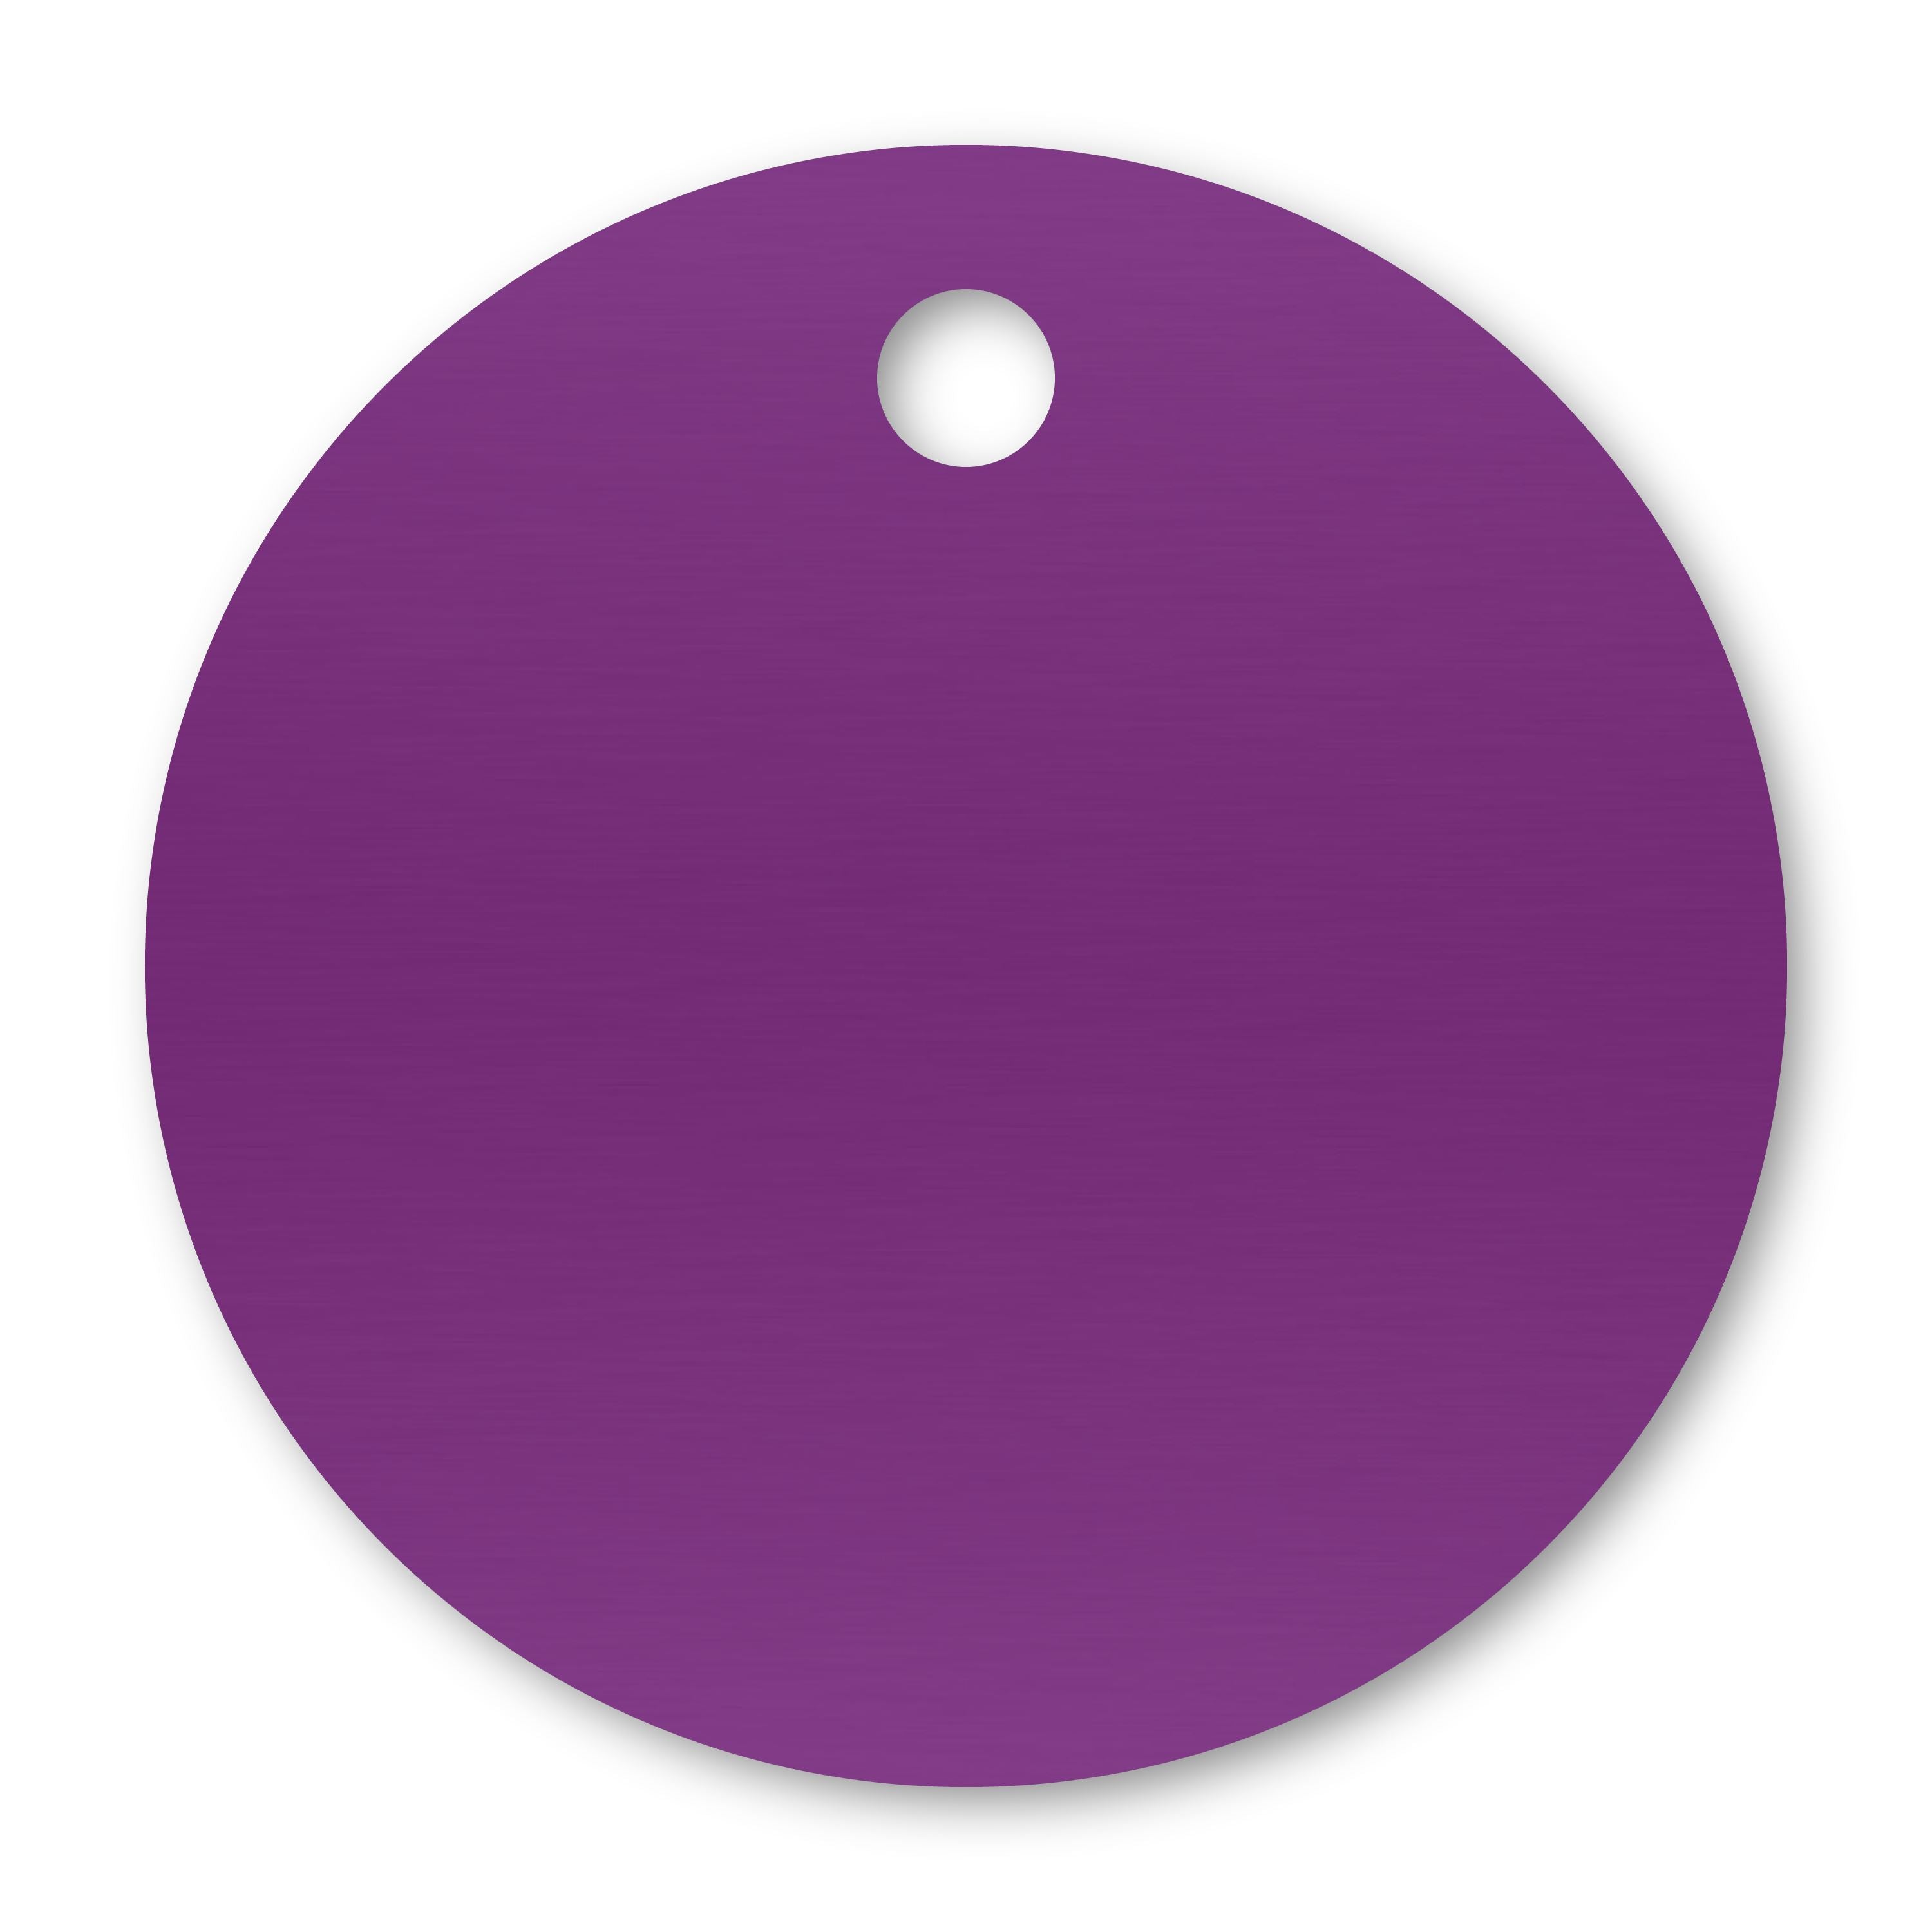 Round Stamping Blanks - Purple Anodized Aluminum - 1 - 10 Tags